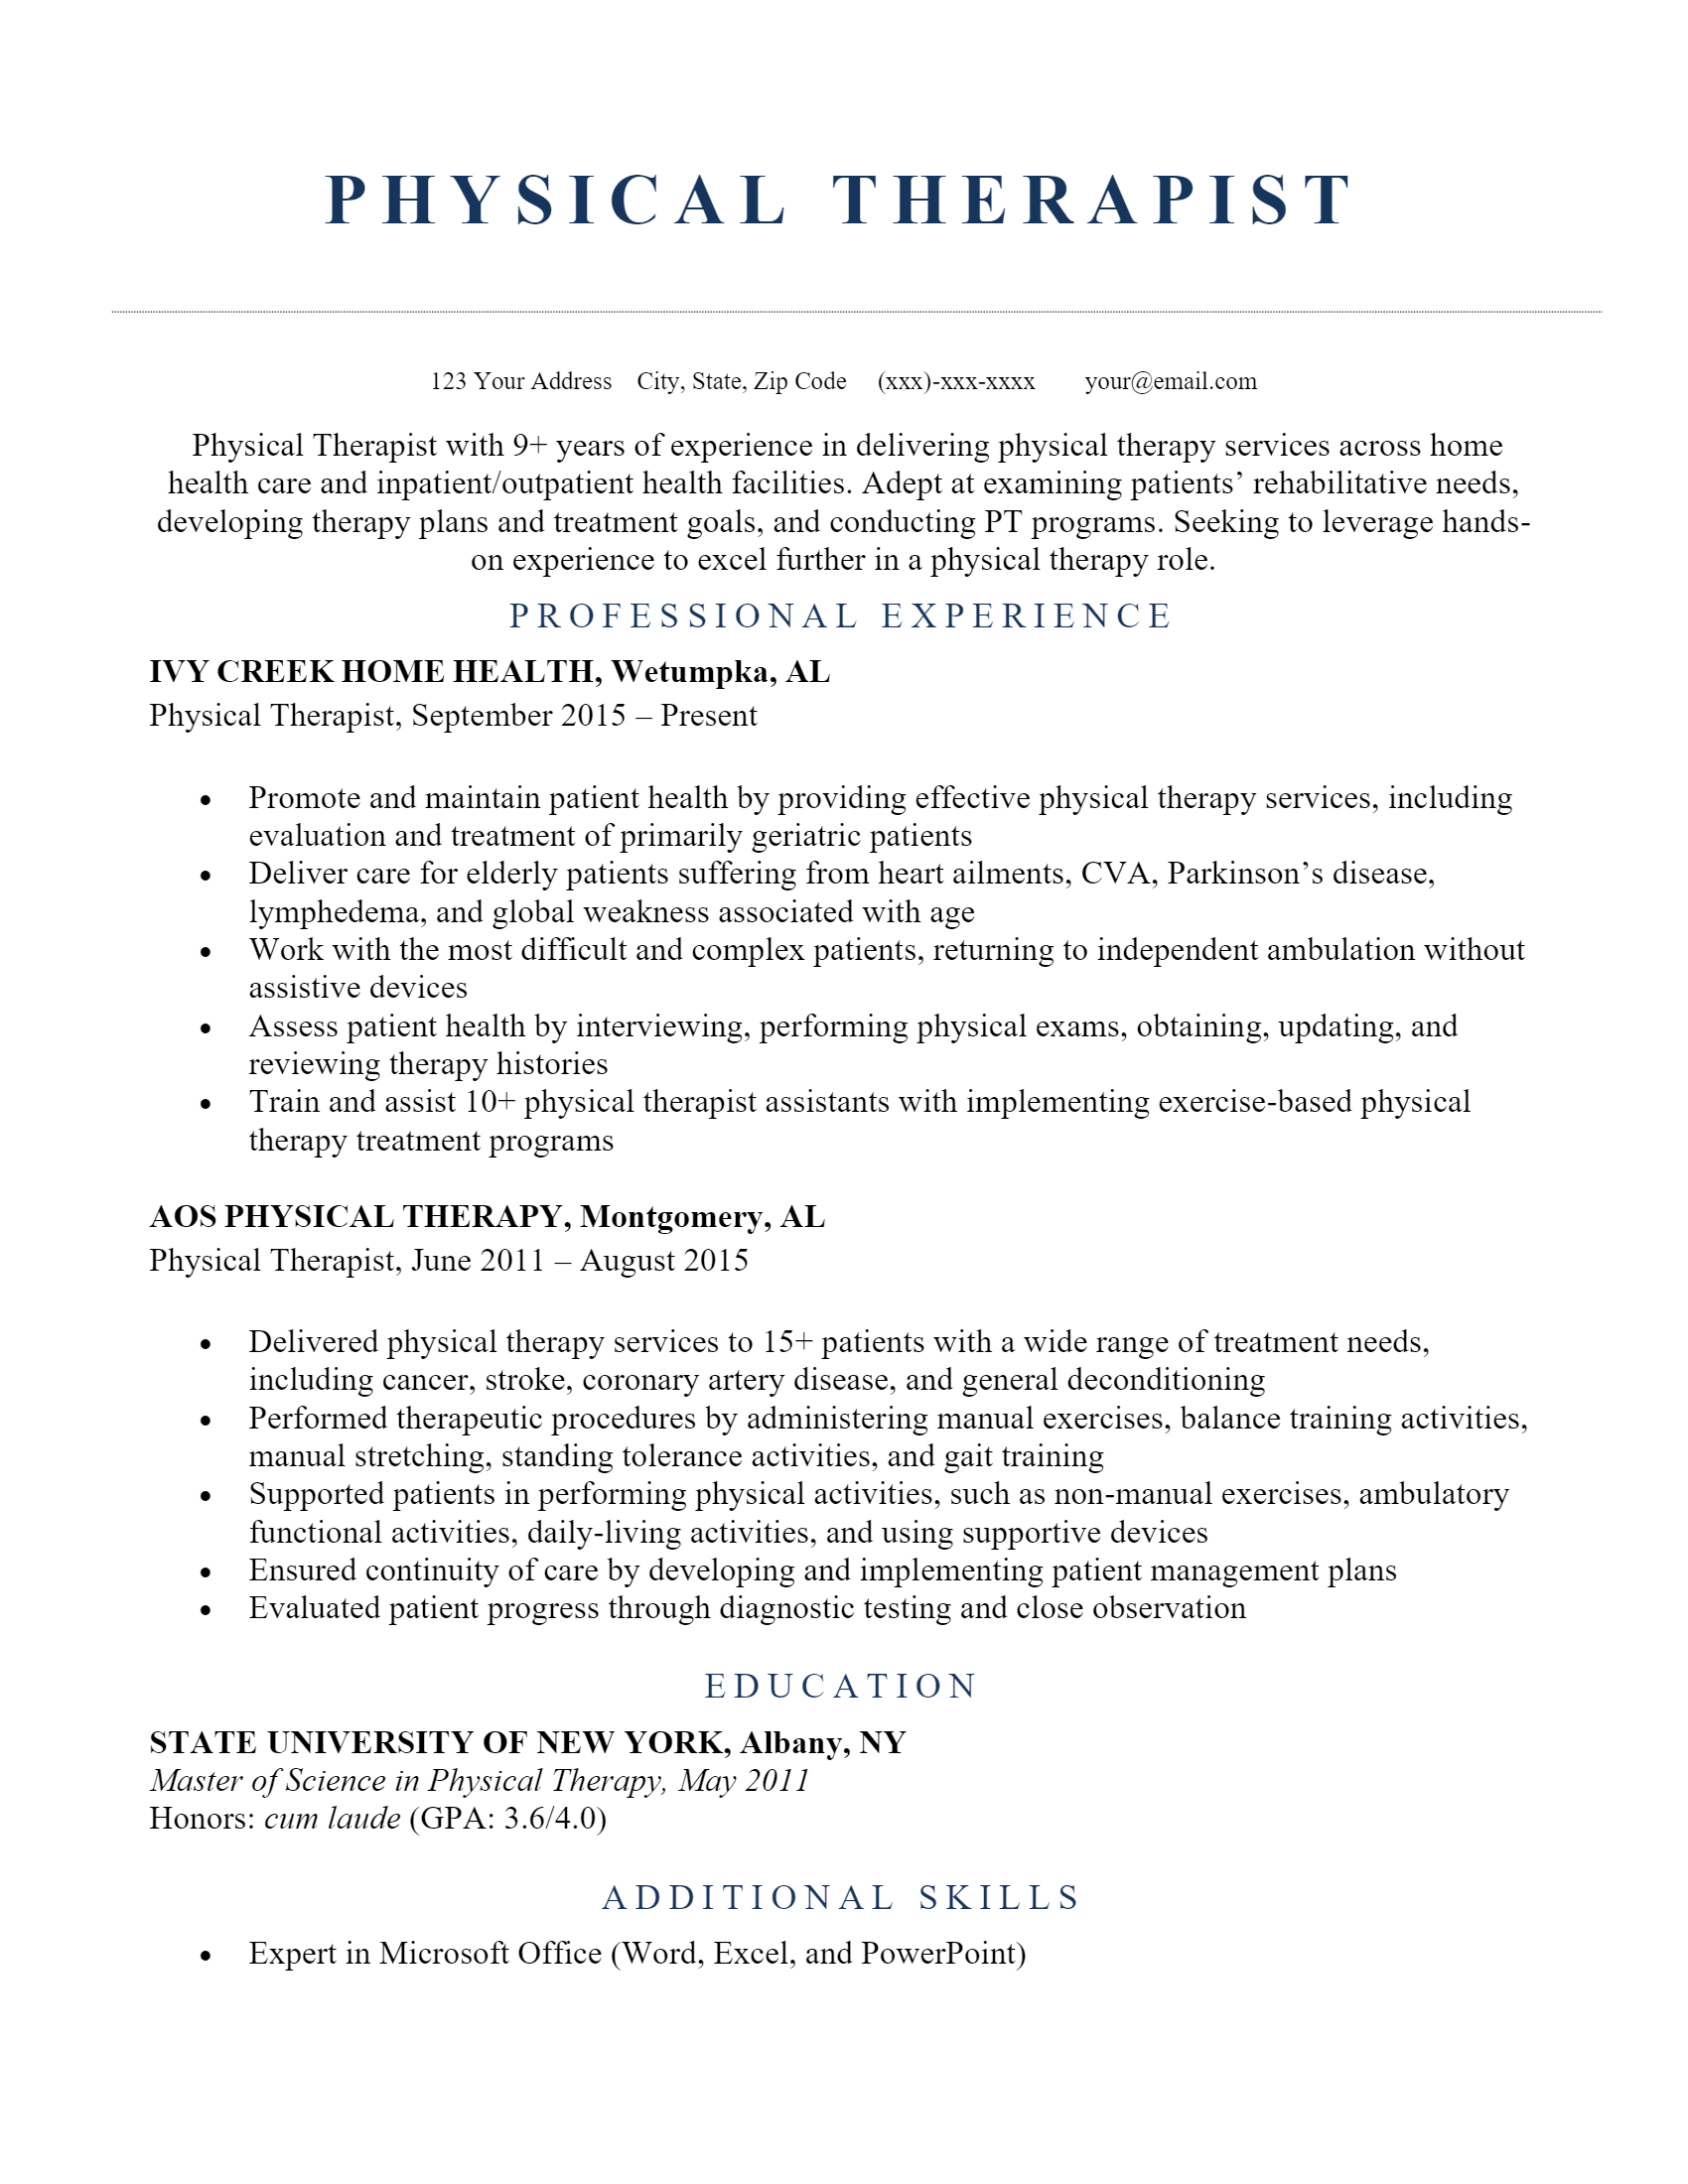 Physical Therapist Resume .Docx (Word)